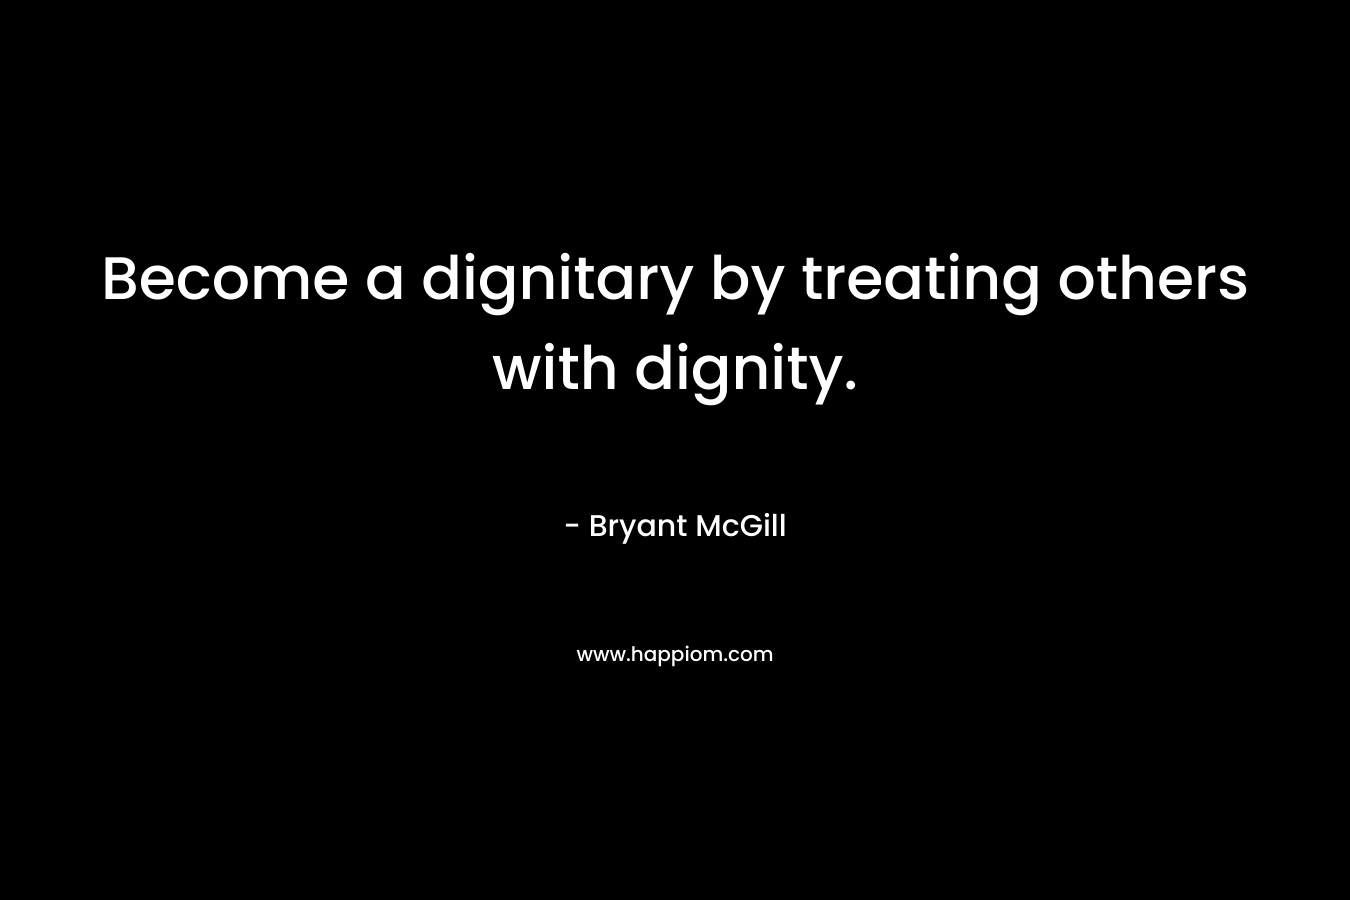 Become a dignitary by treating others with dignity. – Bryant McGill